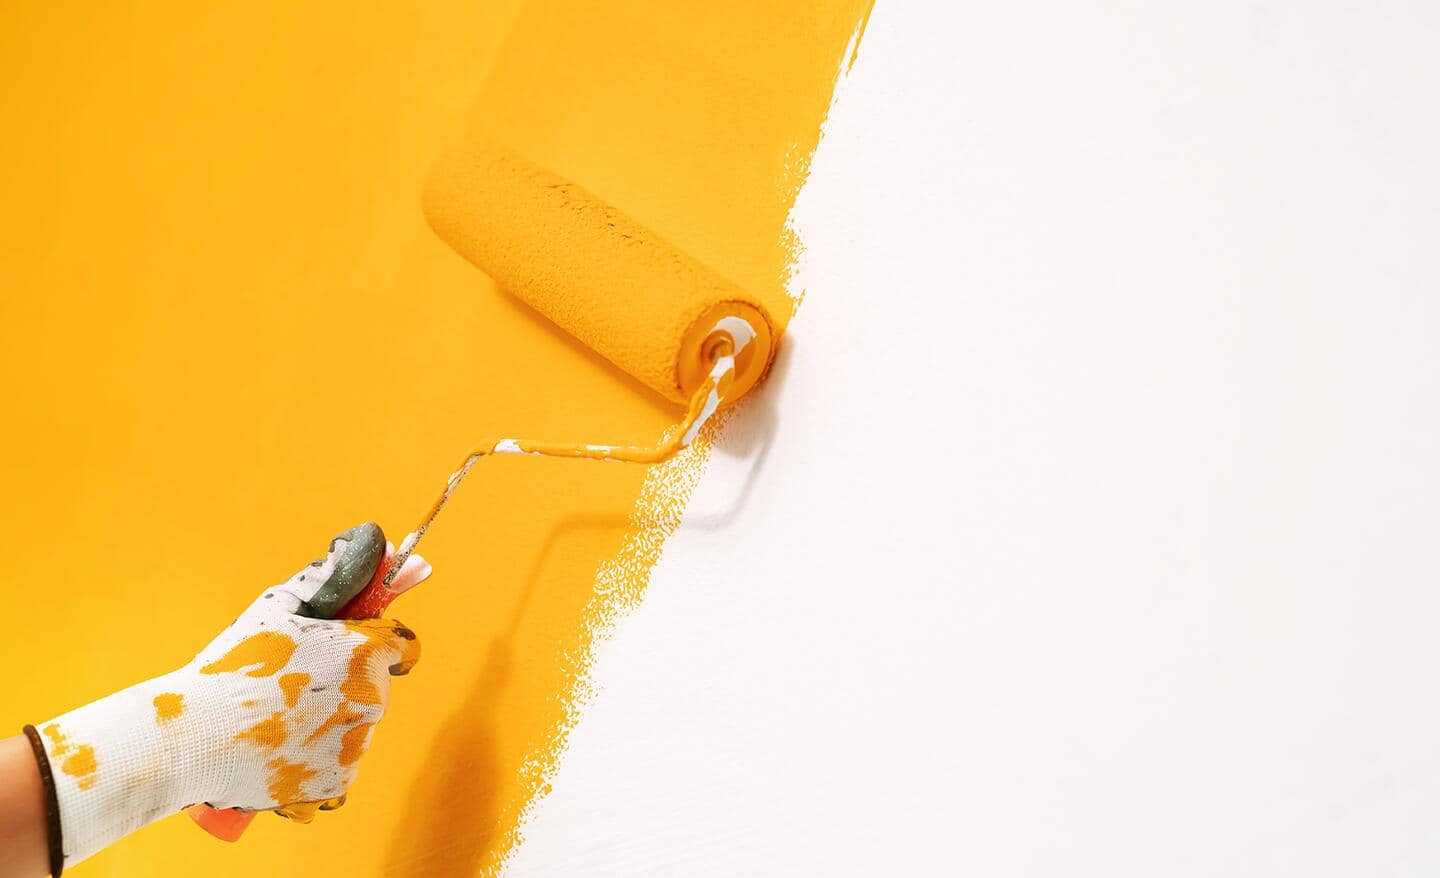 A person rolling paint onto a wall.